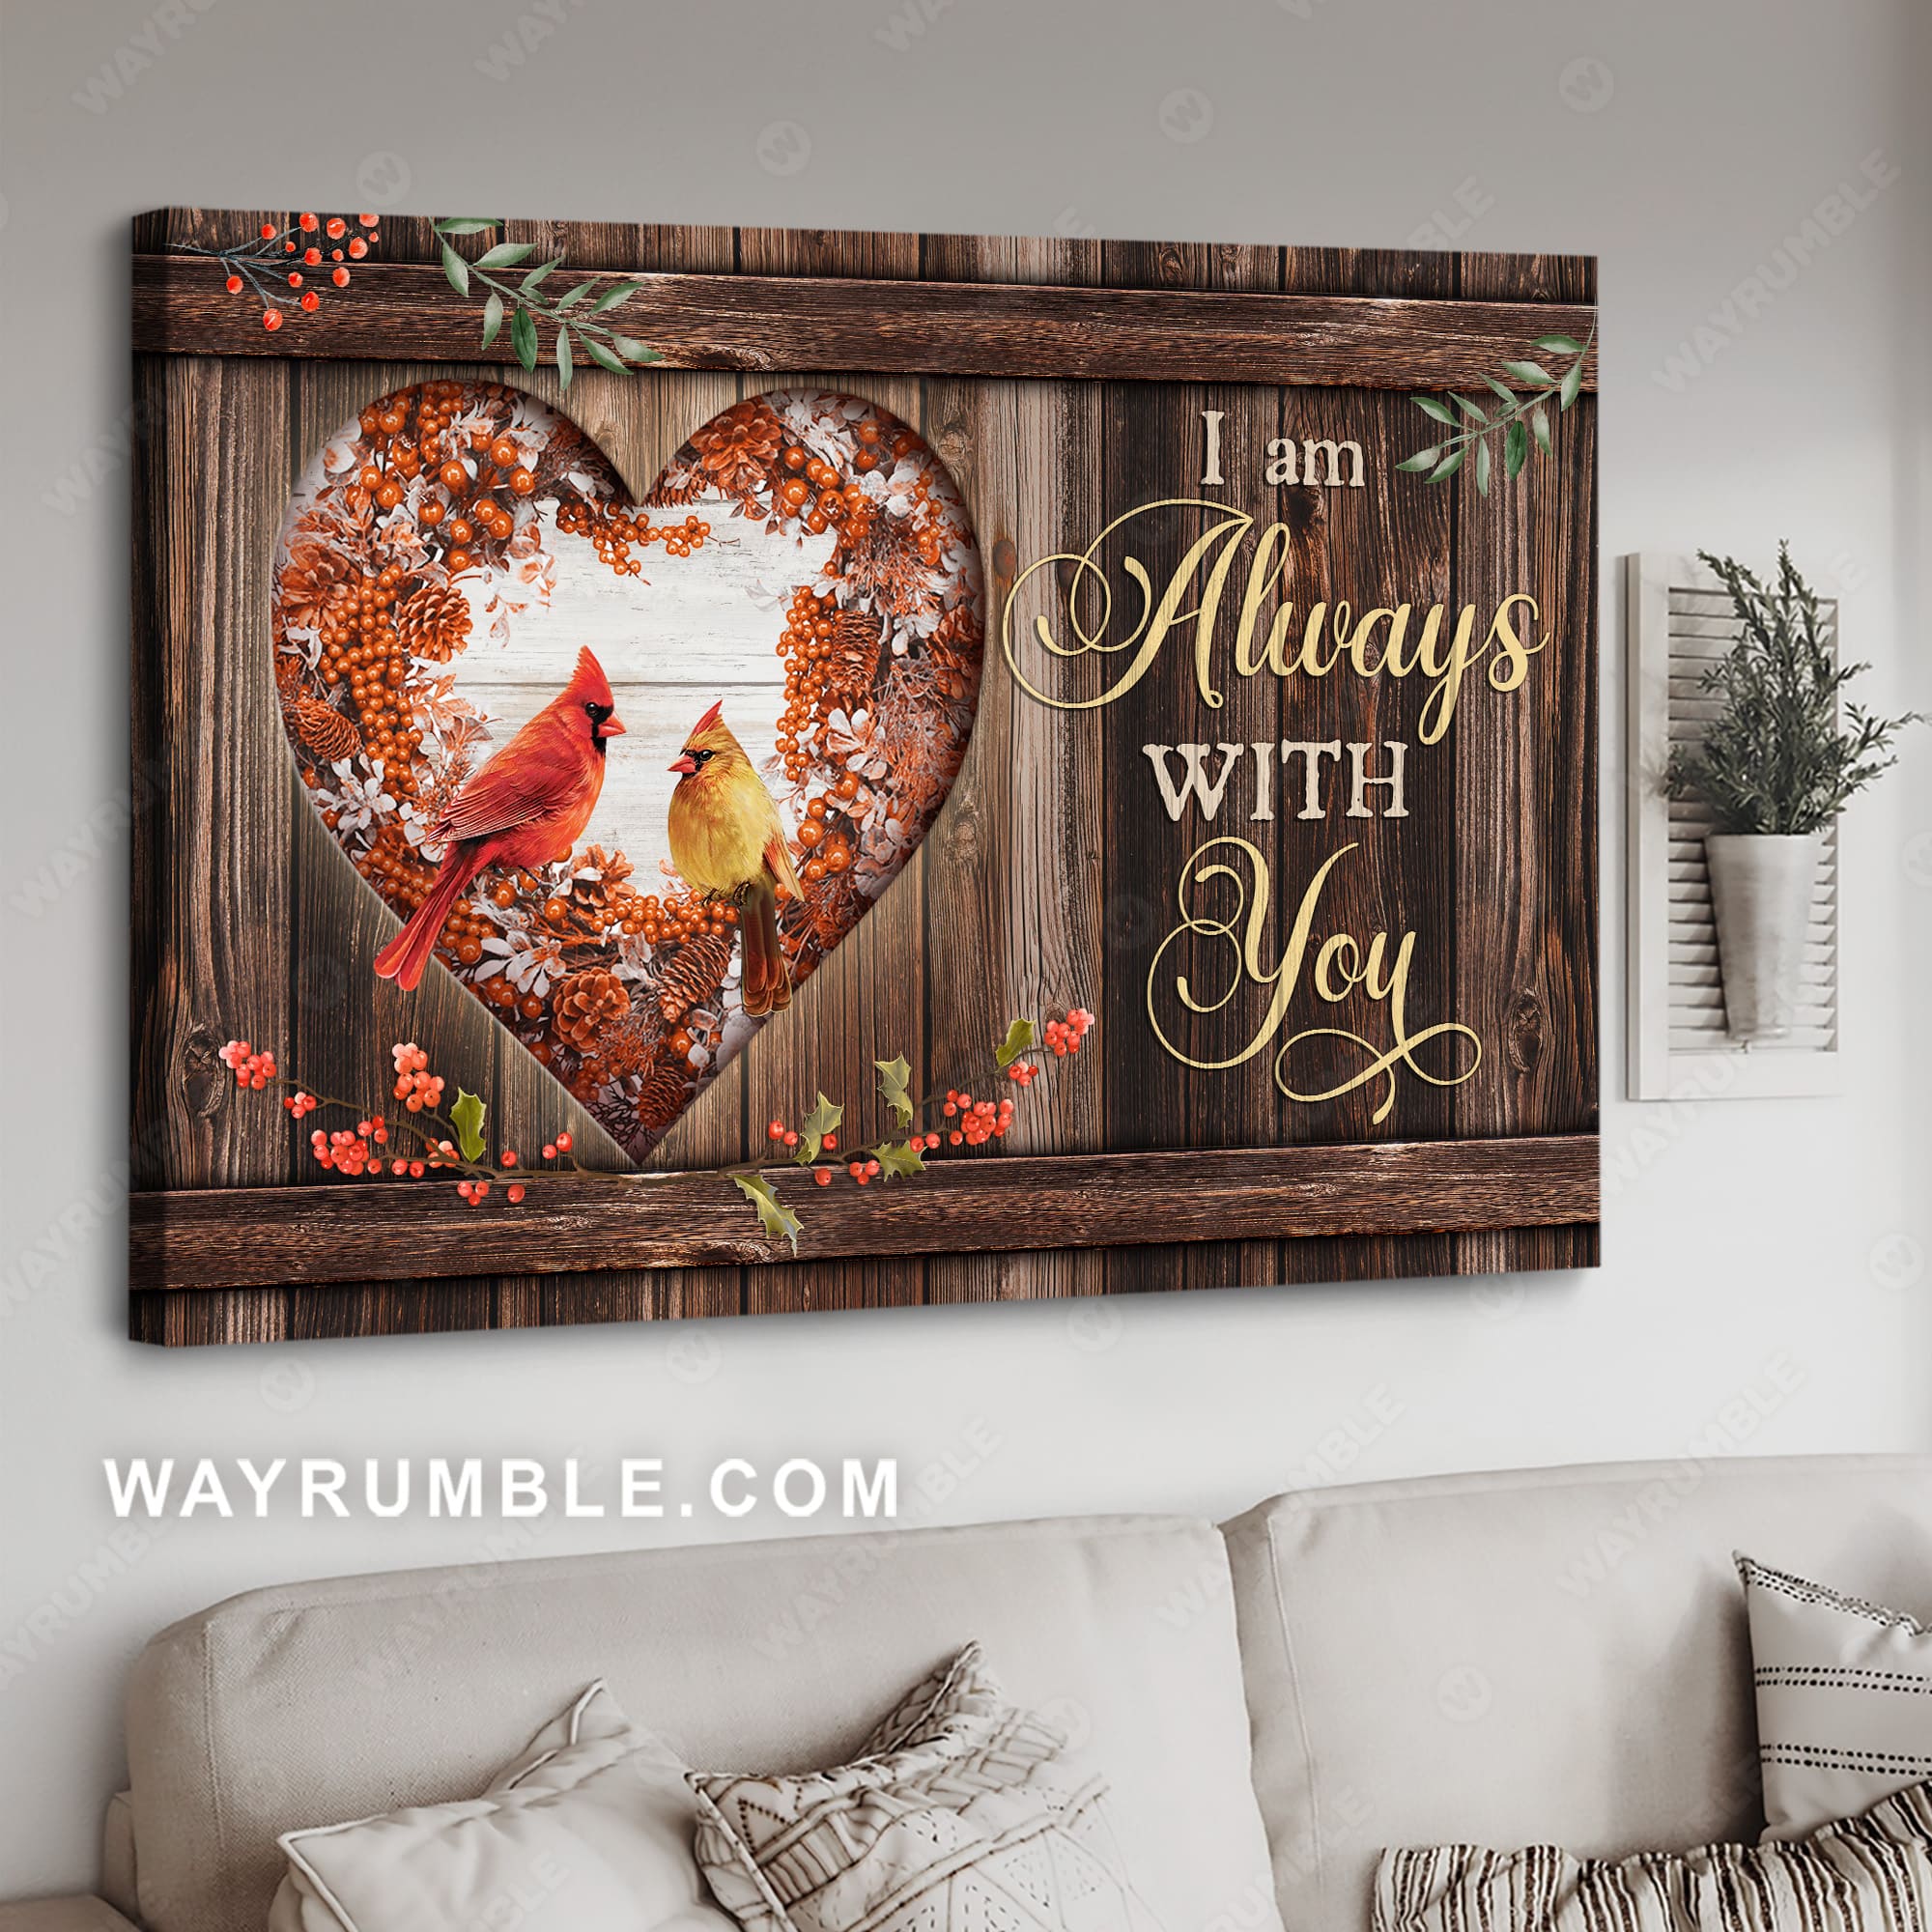 Cardinal painting, Heart shape wooden window, I am always with you - Jesus Landscape Canvas Prints, Wall Art